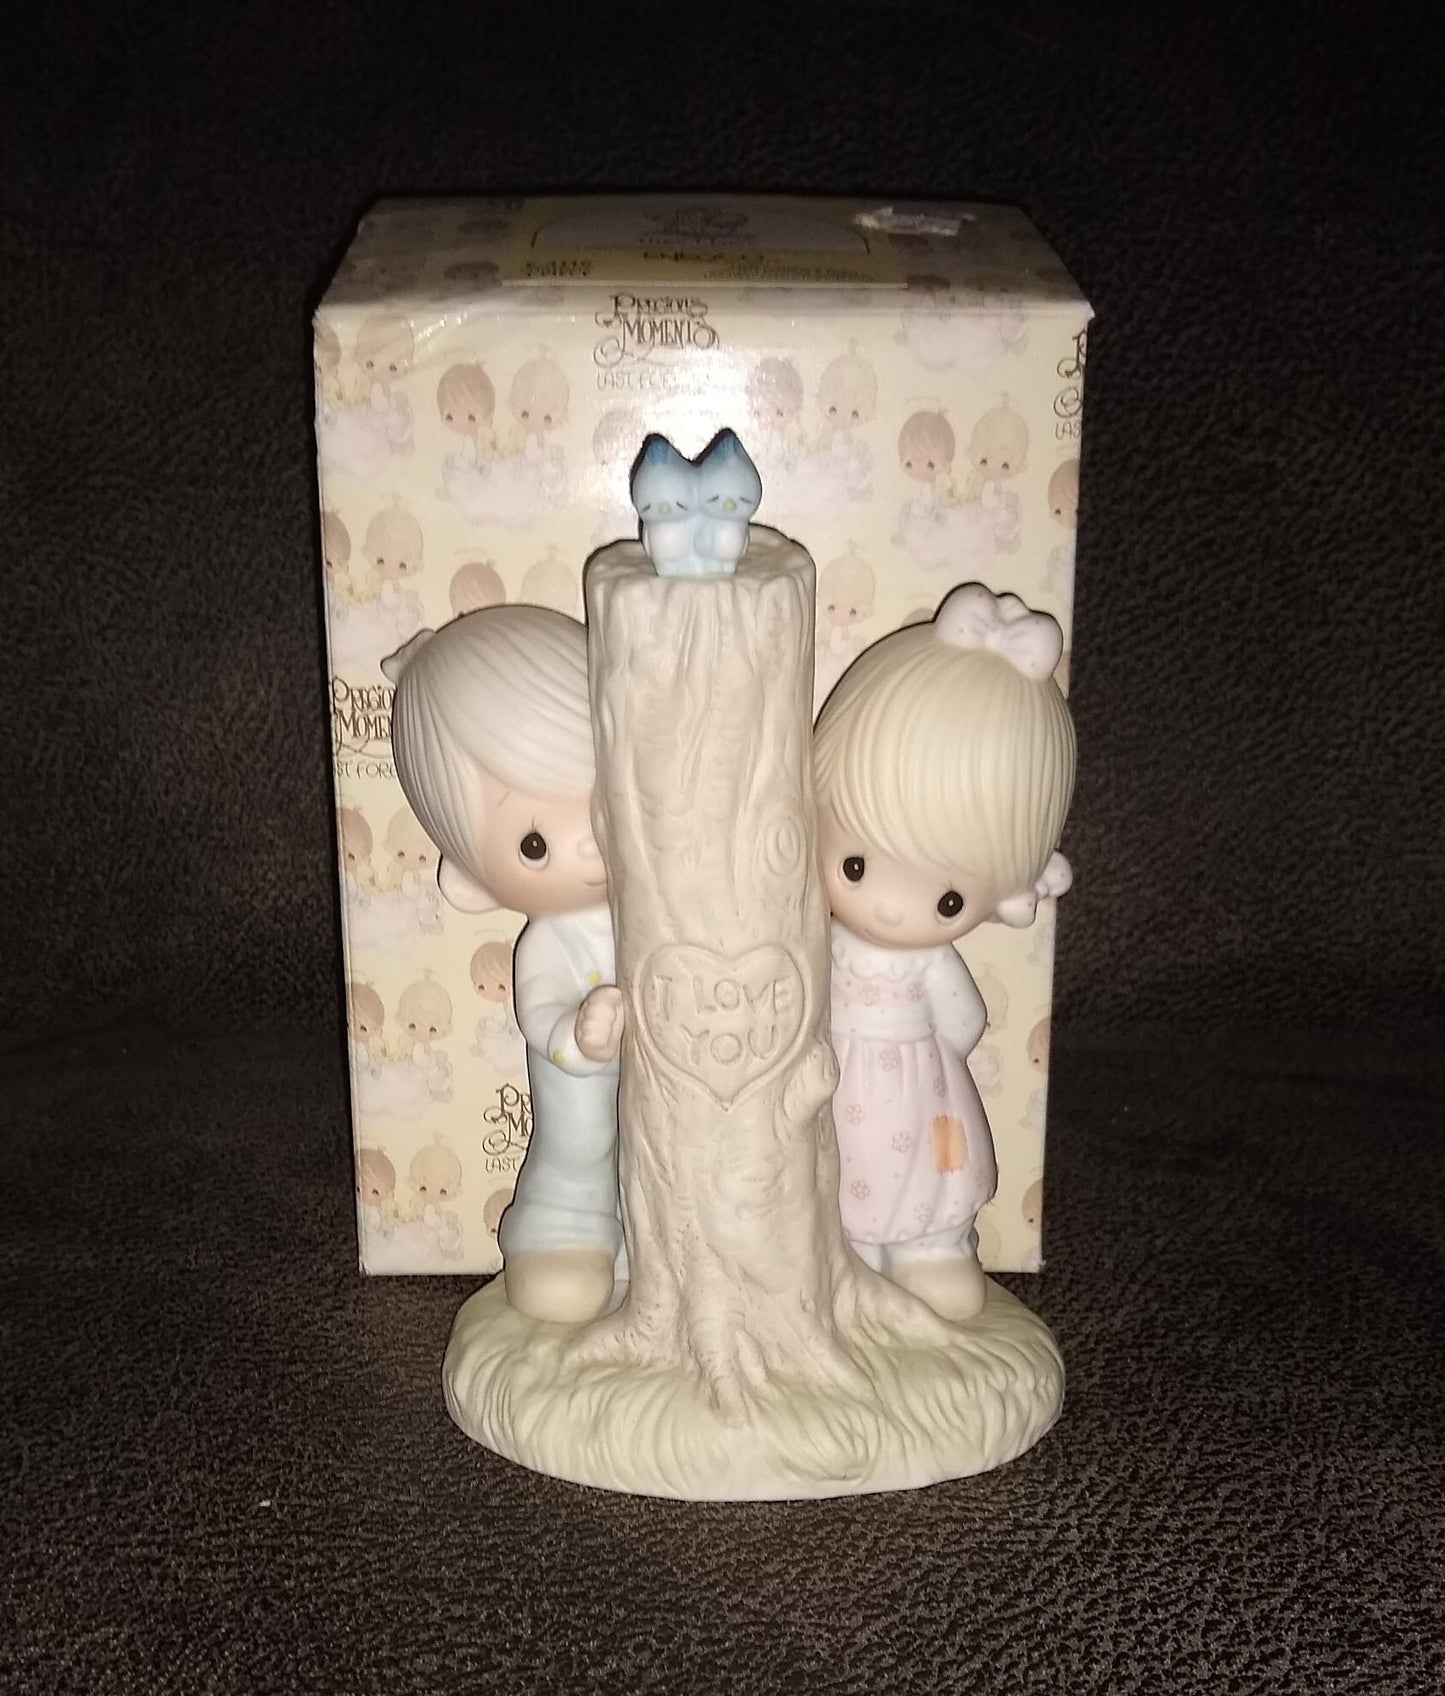 Vintage Precious Moments Figurine Of A Boy And Girl And I Love You Tree Mark And Blue Birds. Thee I Love By Enesco 1979. 